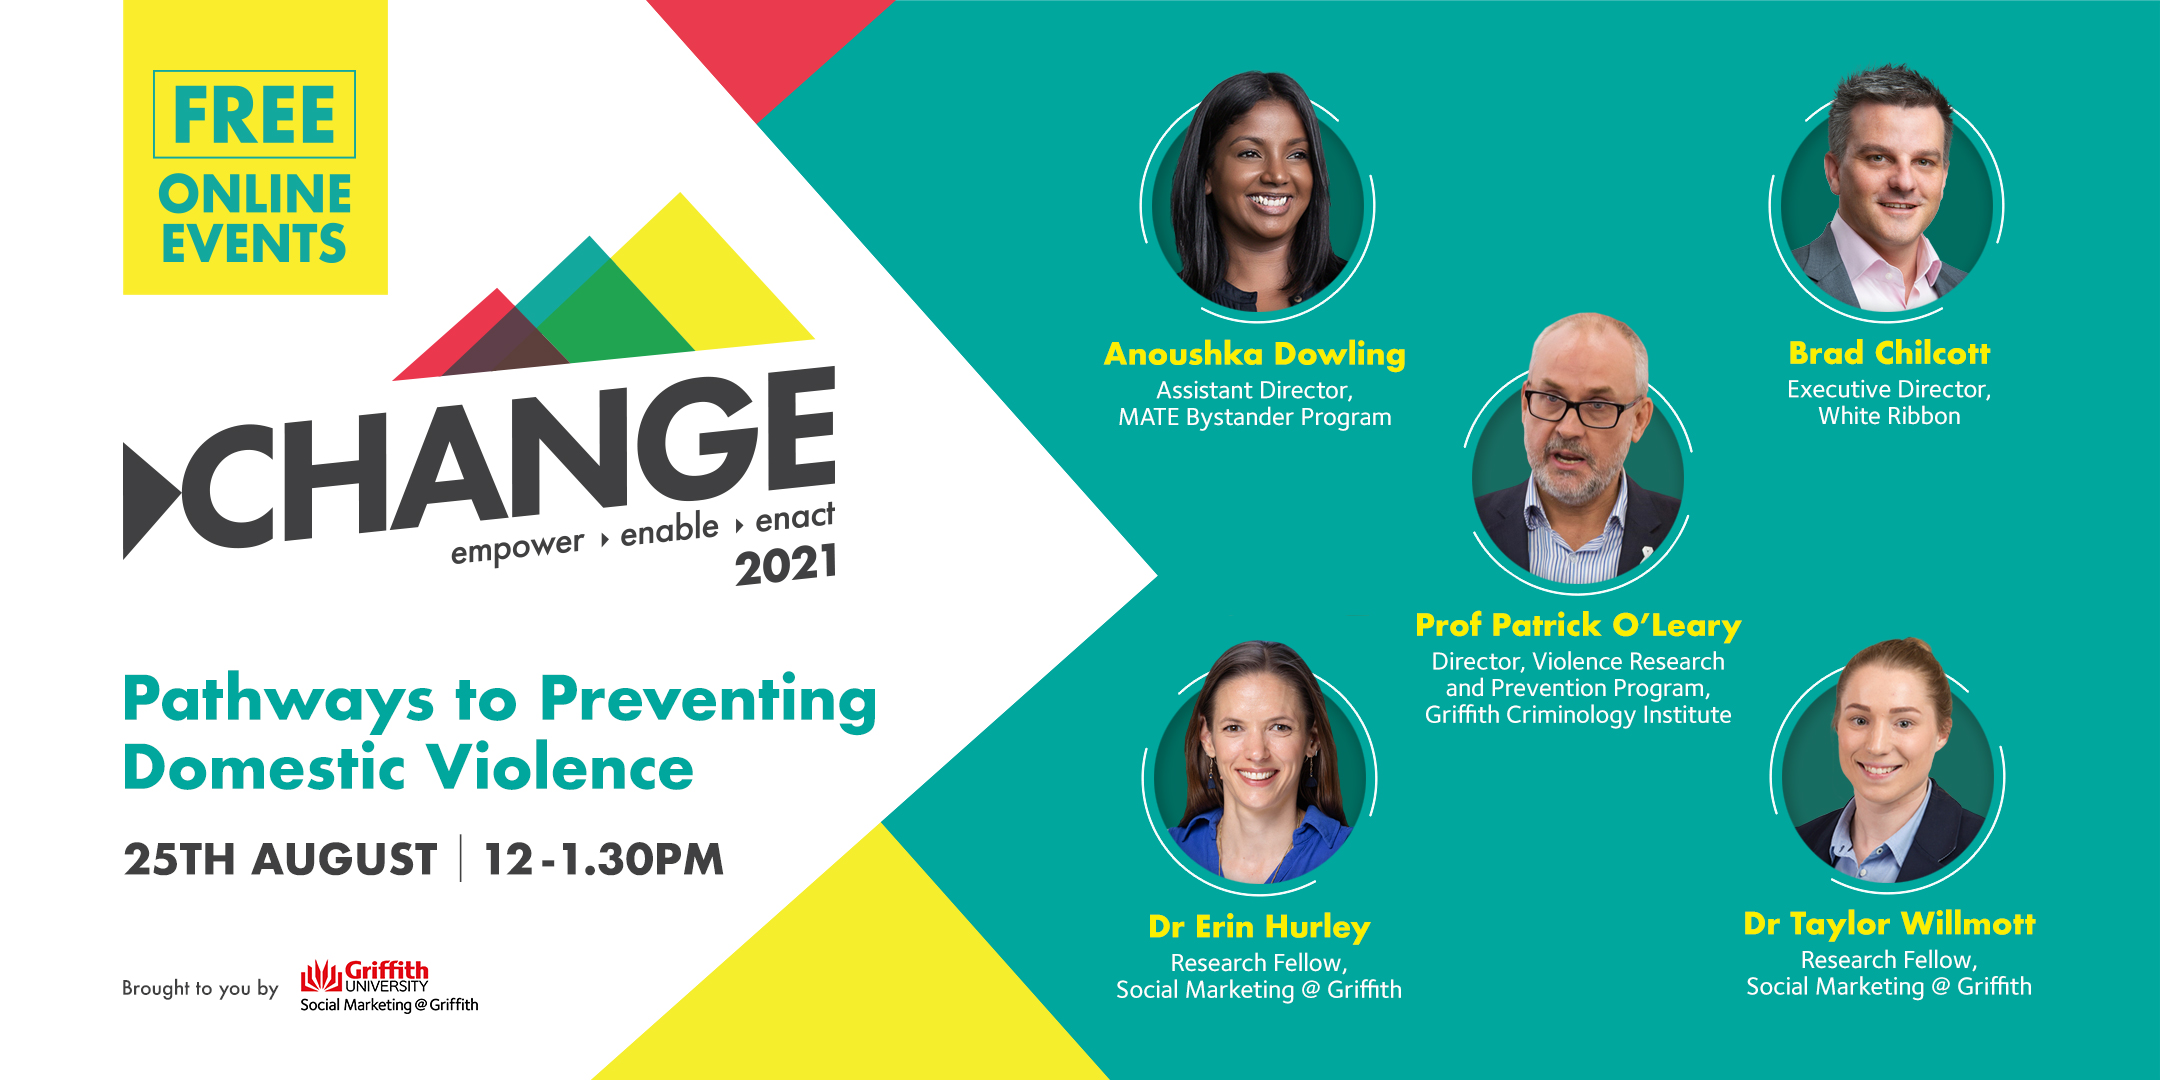 Online Change Event: Pathways to Prevent Domestic Violence